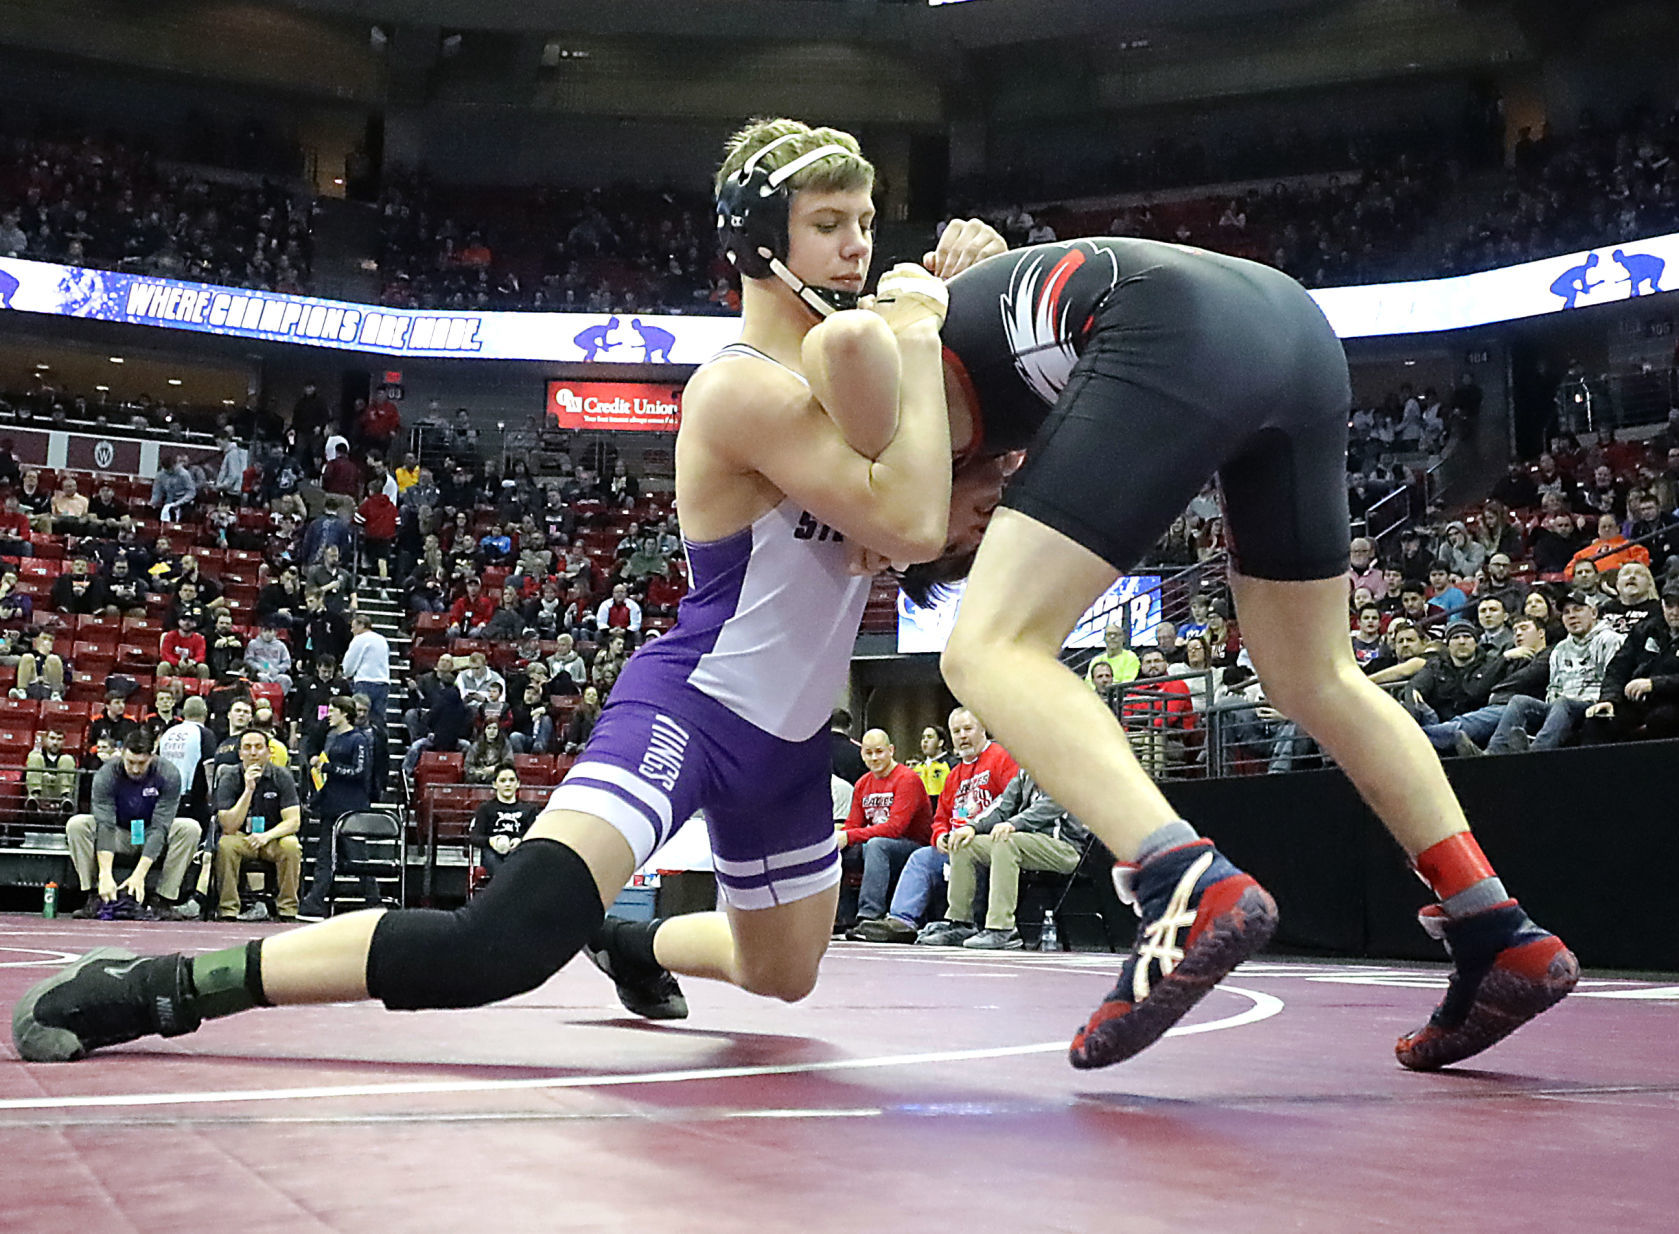 Stoughtons Hunter Lewis wins twice to move into WIAA Division 1 state wrestling semifinals